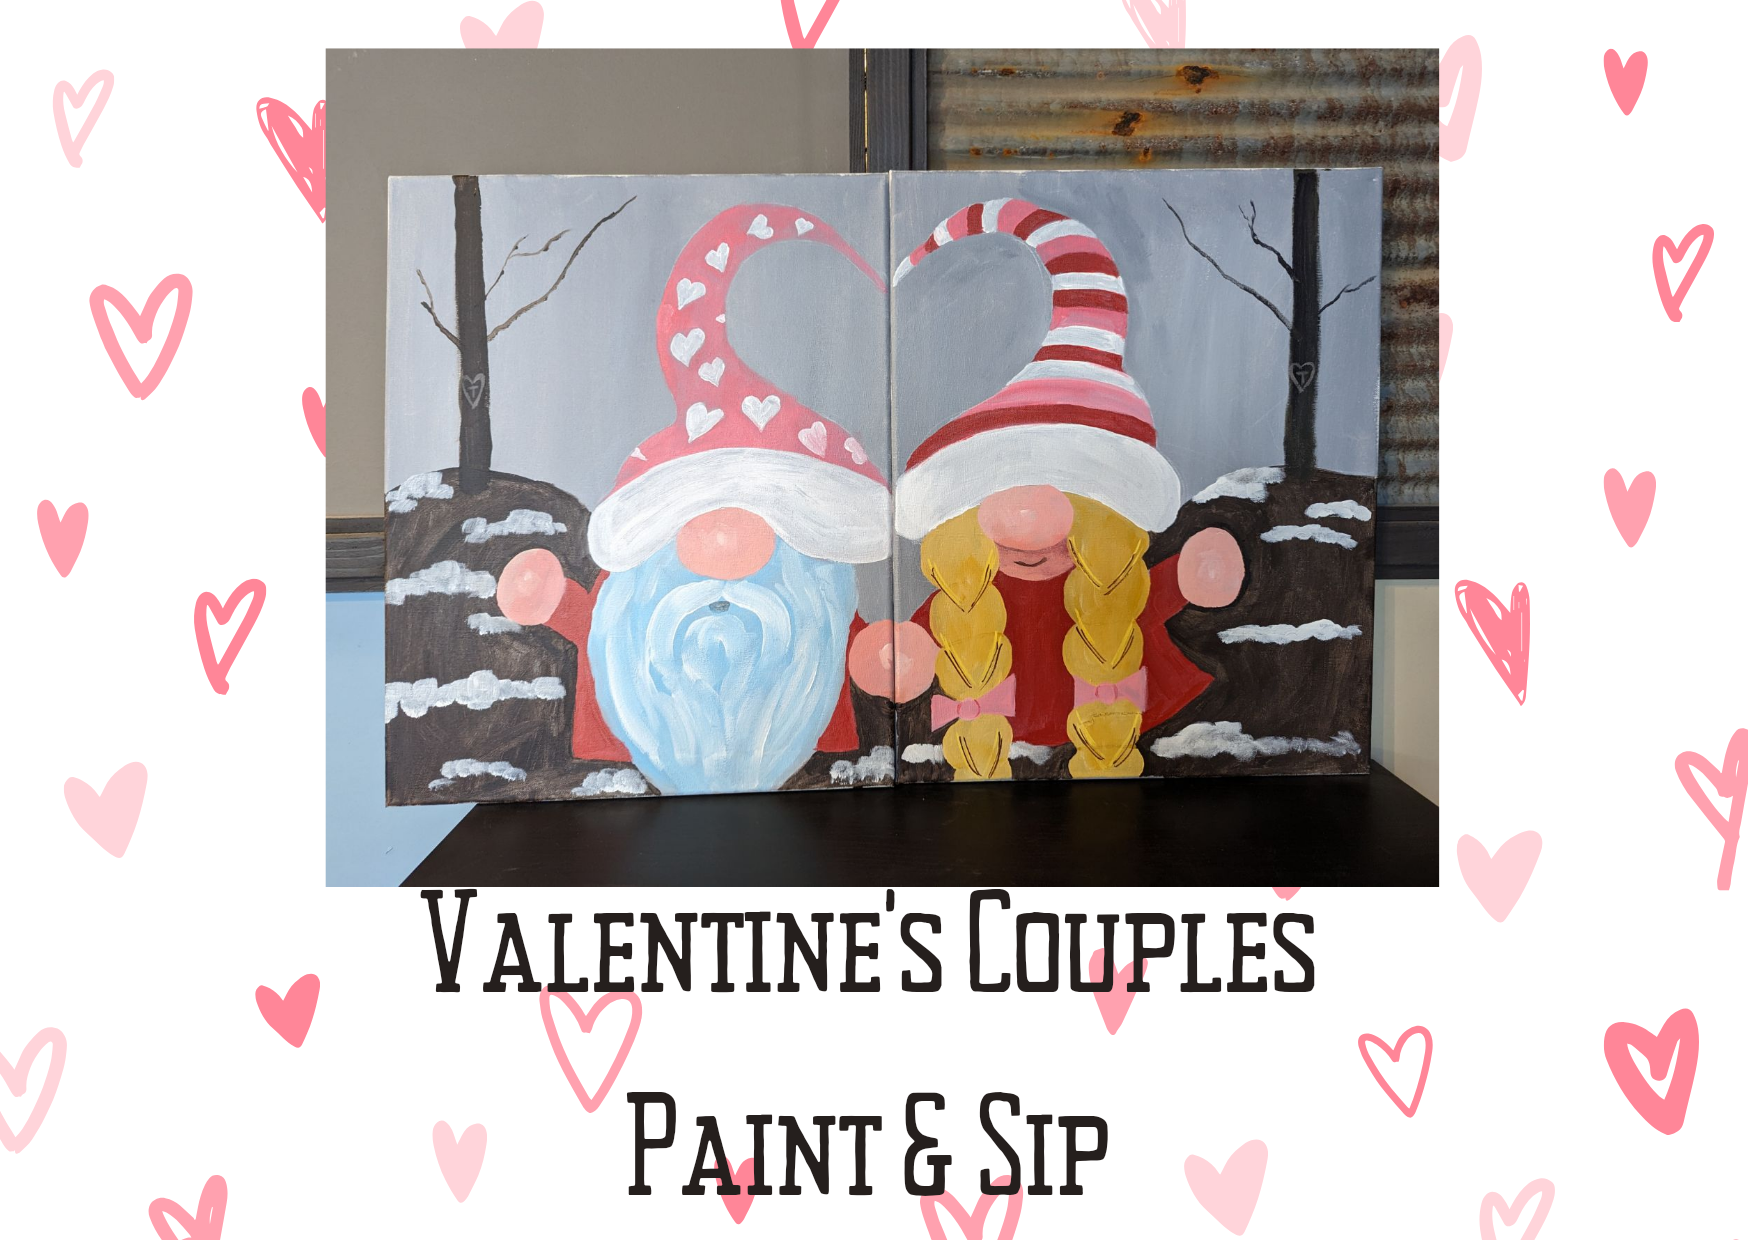 Art at Home: Date Night Lovebirds Couples Paint and Sip